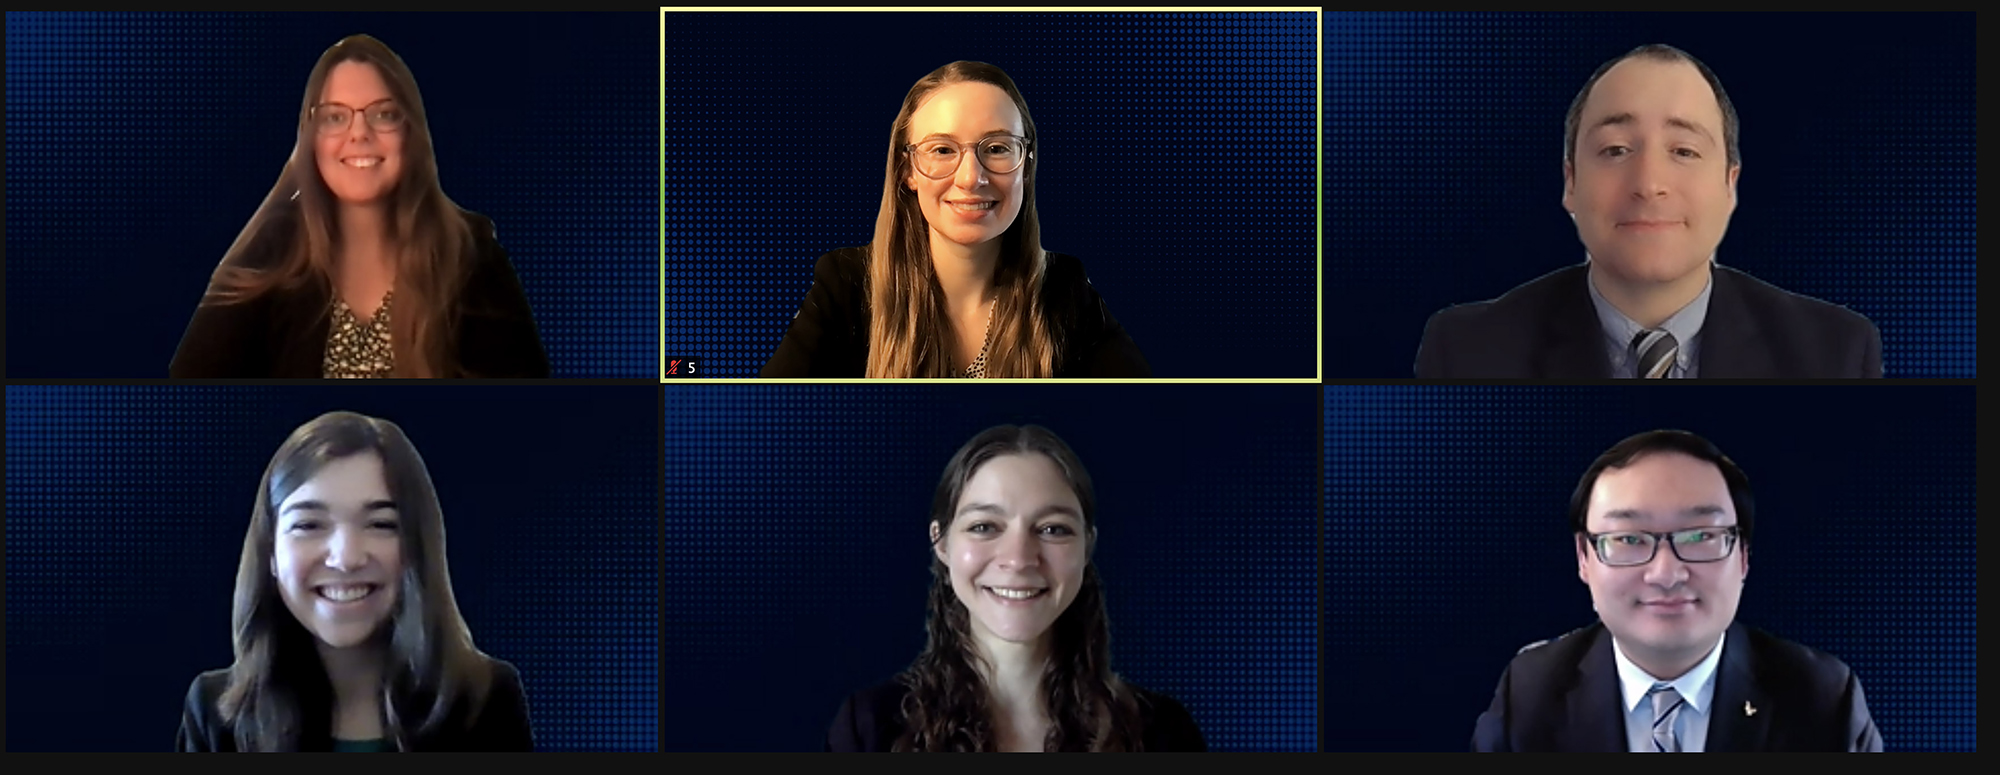 Savanna Ledford, Krista Hartmann, Brian Drury, Xingyan Wang, Emma Baker and Laura Guay are pictured in Zoom squares during a competition held virtually.